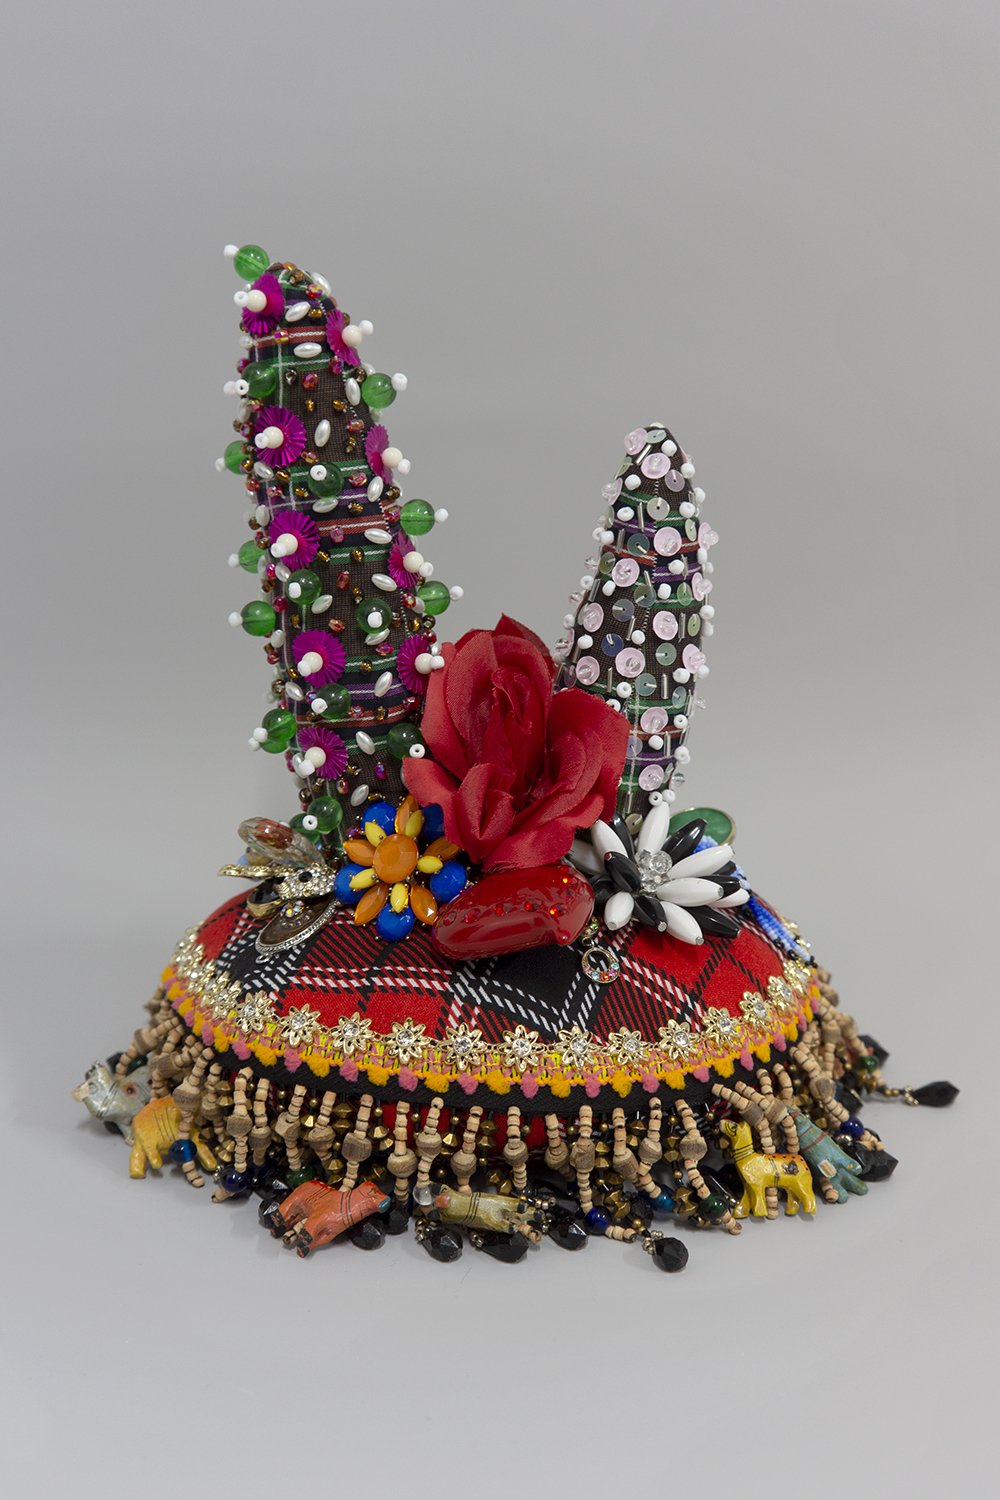   Untitled,  2022, Crystal and plastic beads and sequins, found fabric, trim, fabric flowers, costume jewelry, polyester batting, thread, 10.5 x 9.5 x 8.5” 